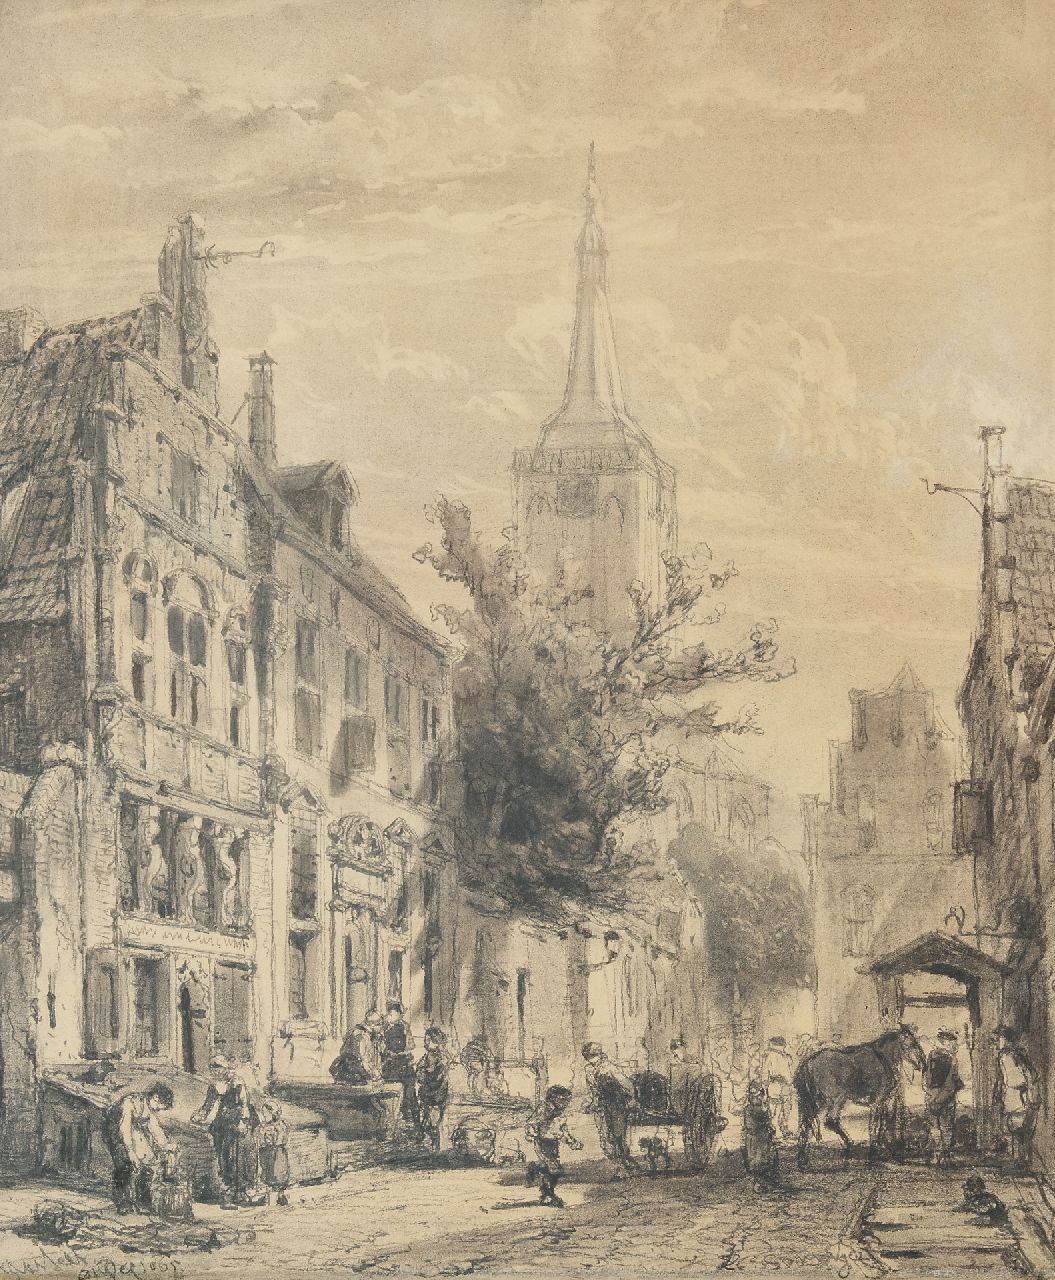 Springer C.  | Cornelis Springer | Watercolours and drawings offered for sale | View of the Nieuwstraat in Hasselt, Overijssel, charcoal on paper 61.1 x 51.0 cm, signed l.r. and dated Hasselt April 1863